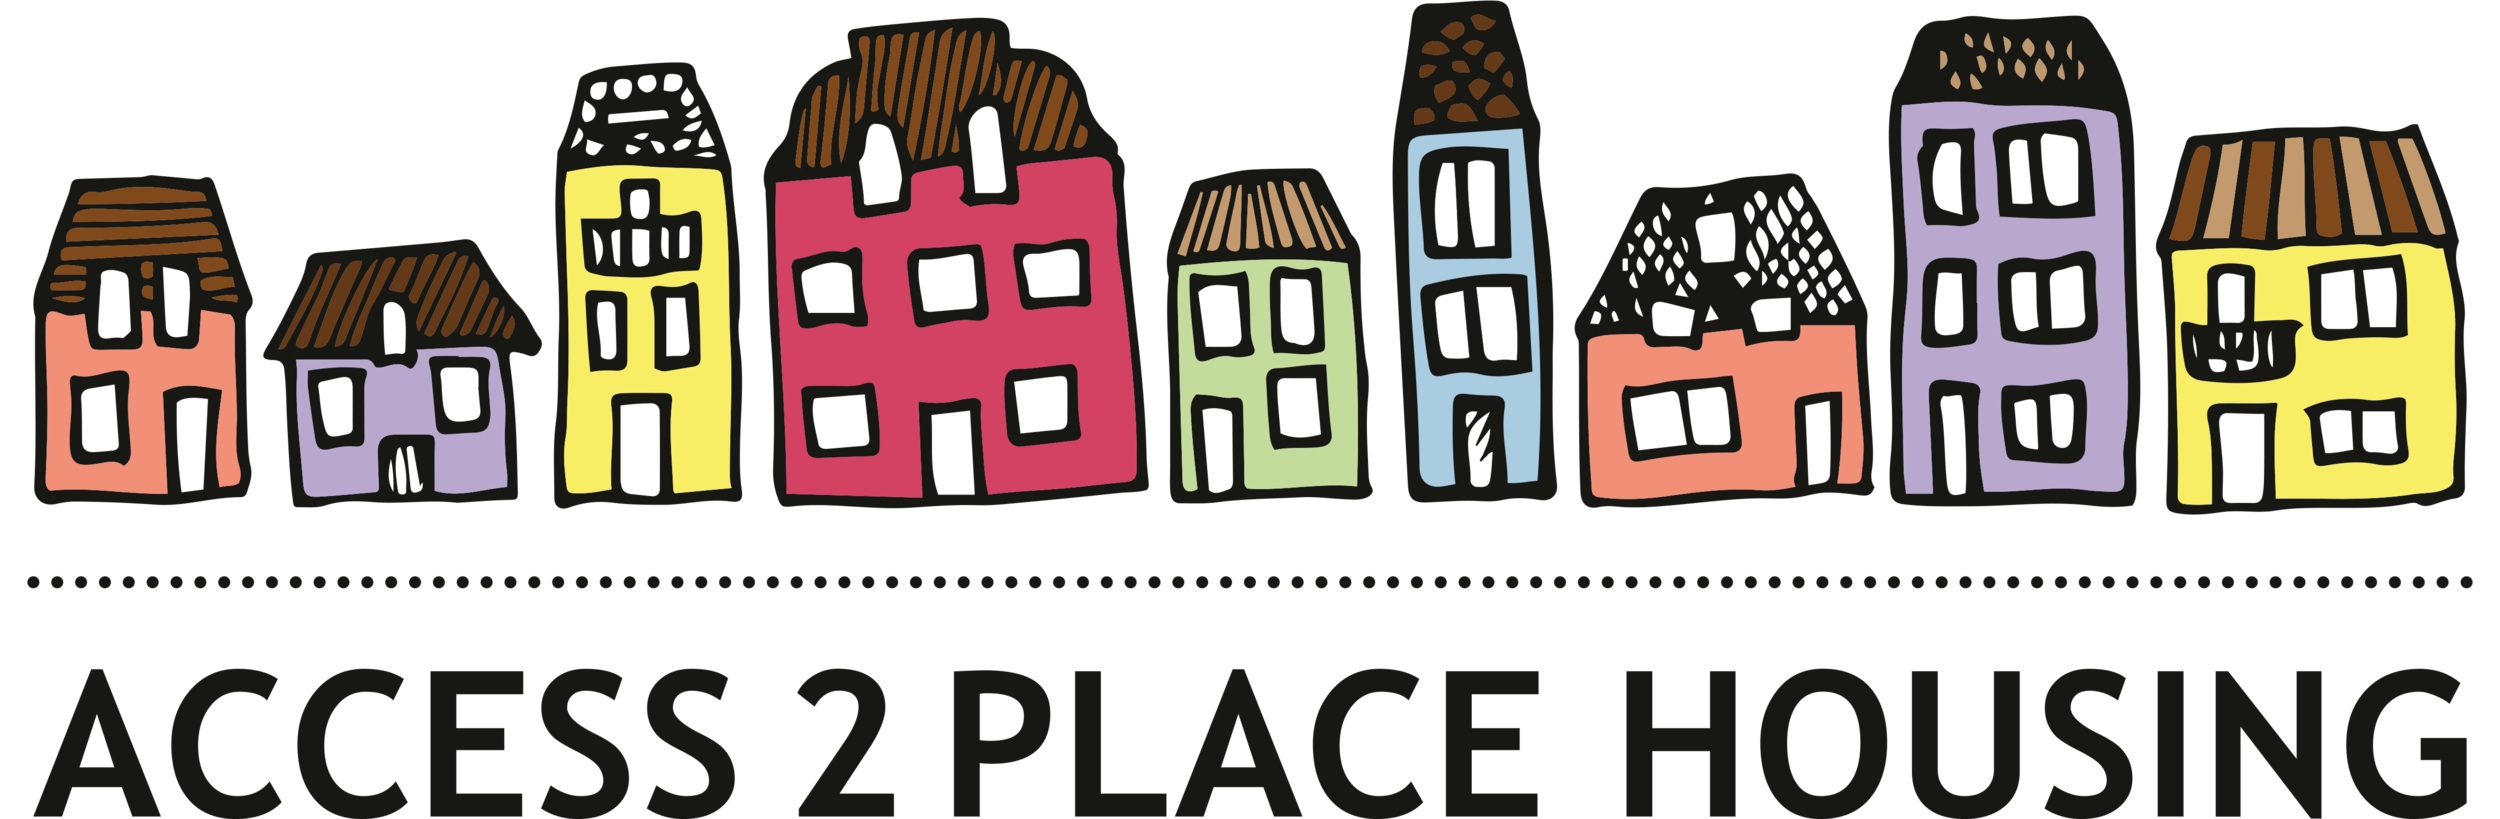 ACCESS 2 PLACE HOUSING